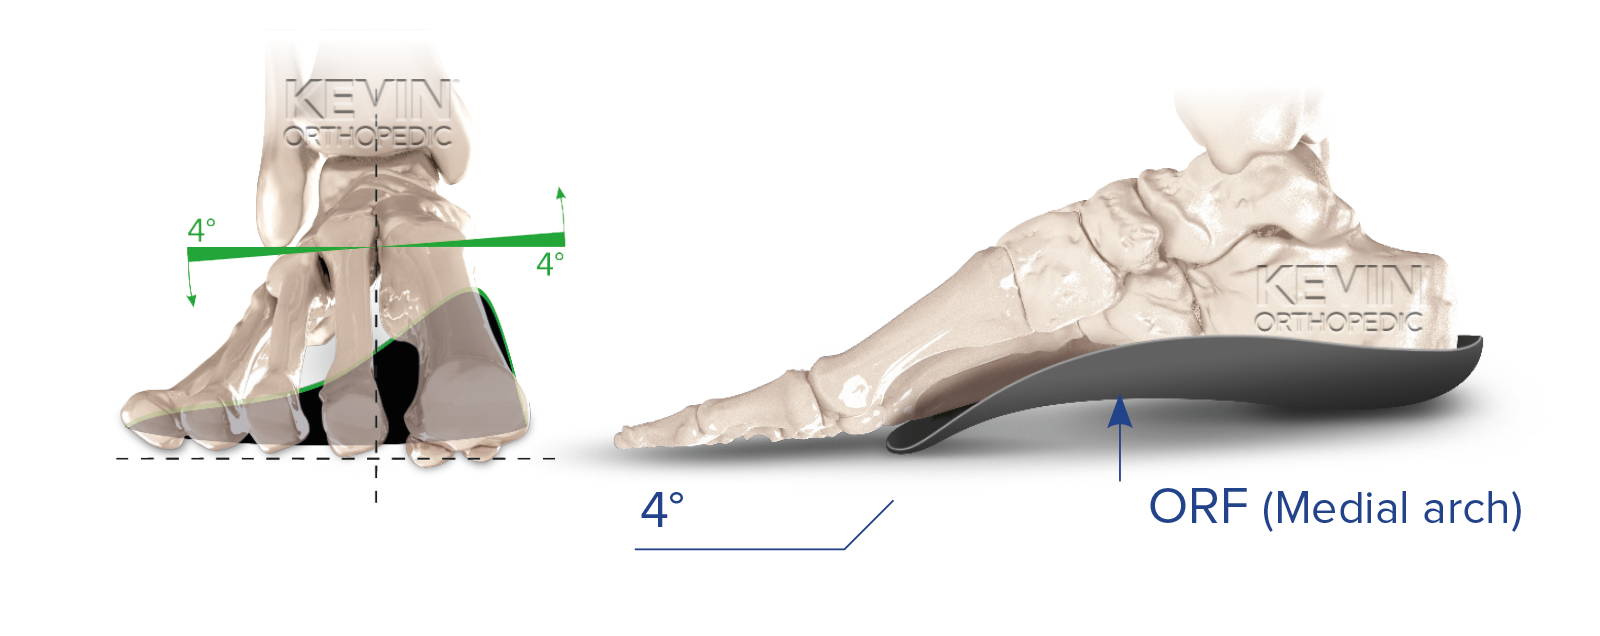 THE CLINIC GUIDE: PRONATION - Heel Skive – Kevin Orthopedic Institute